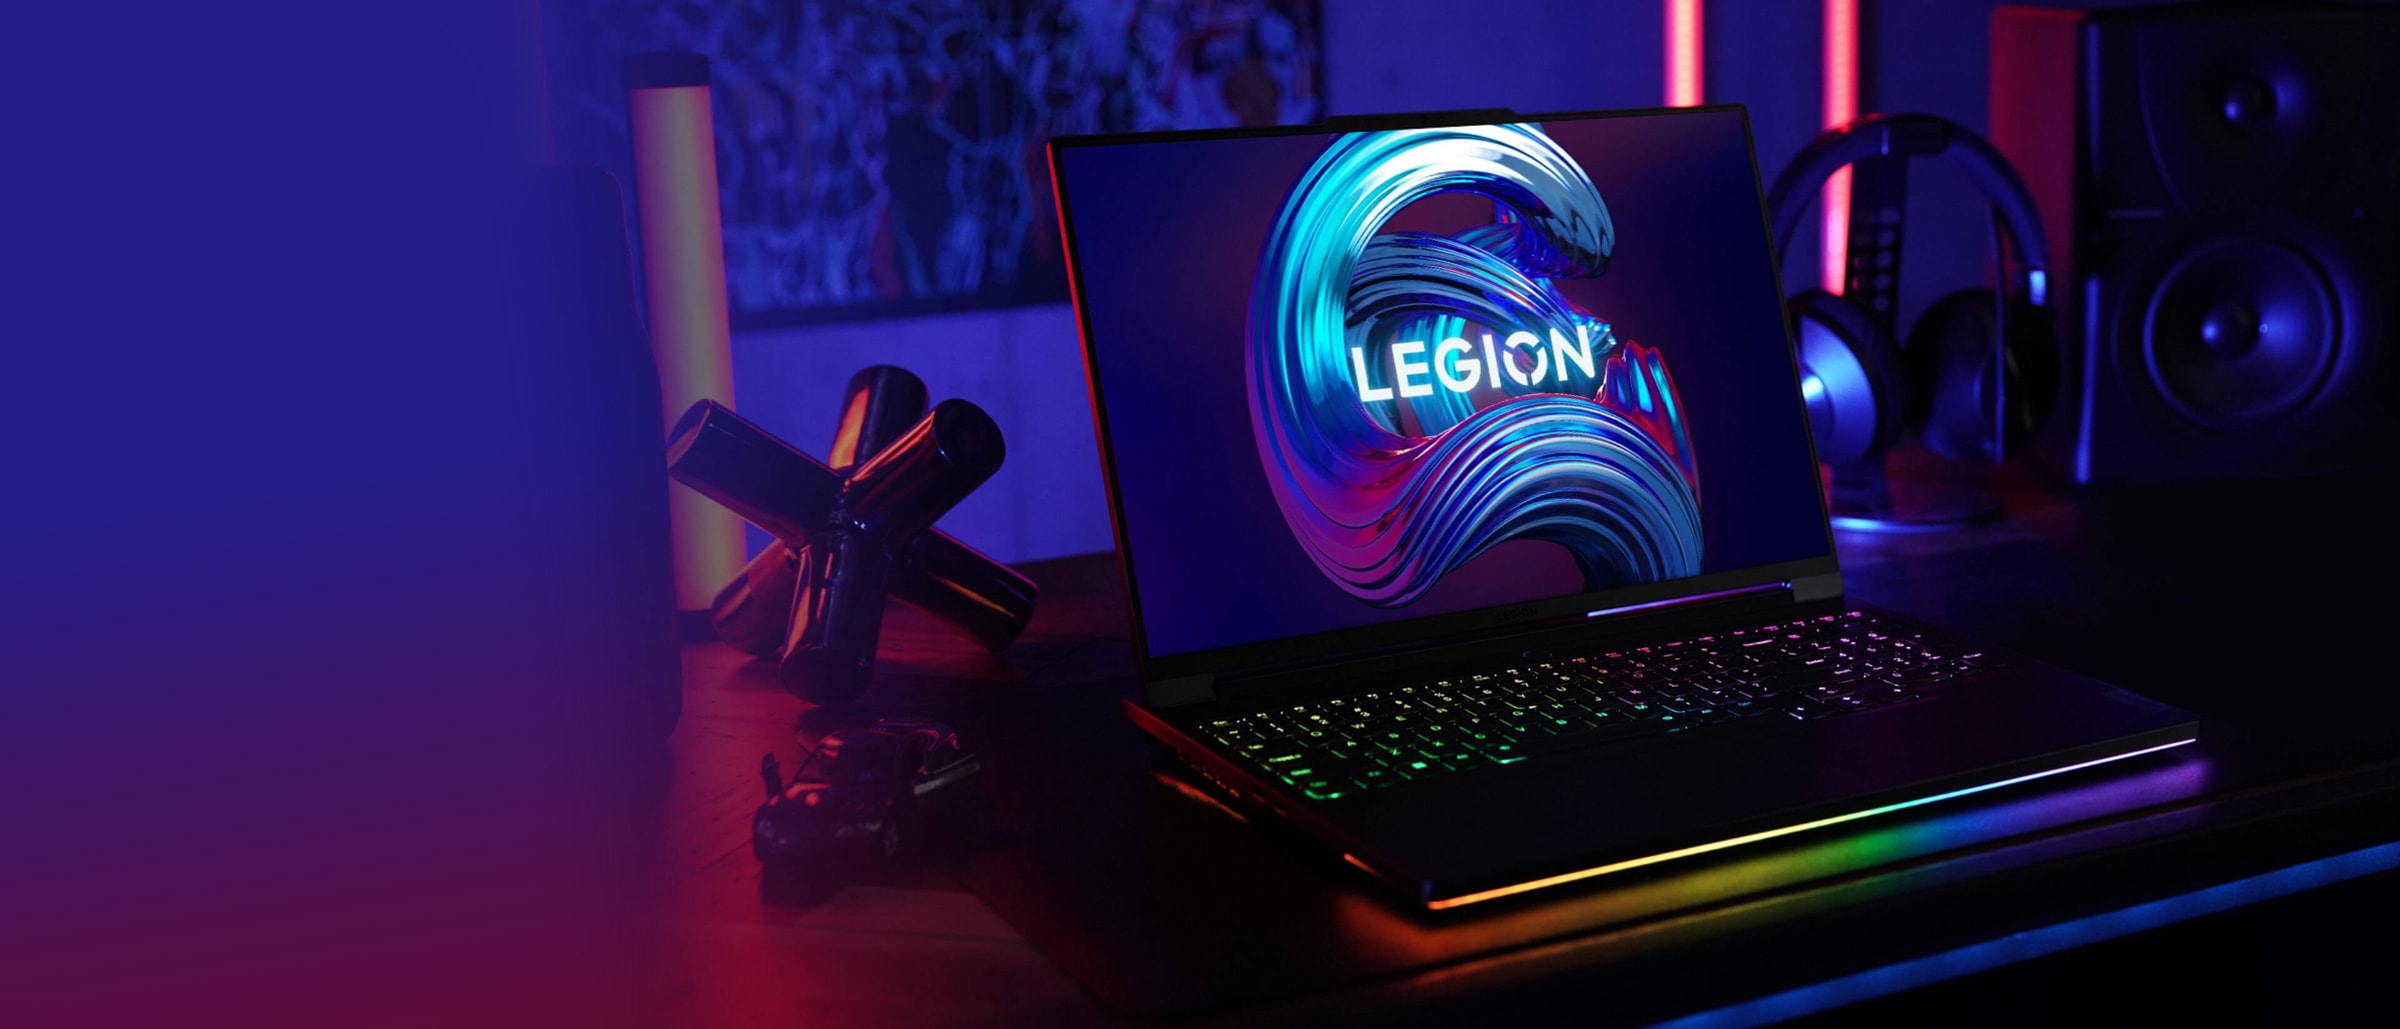 8 Reasons Why College Students Need Gaming Laptop